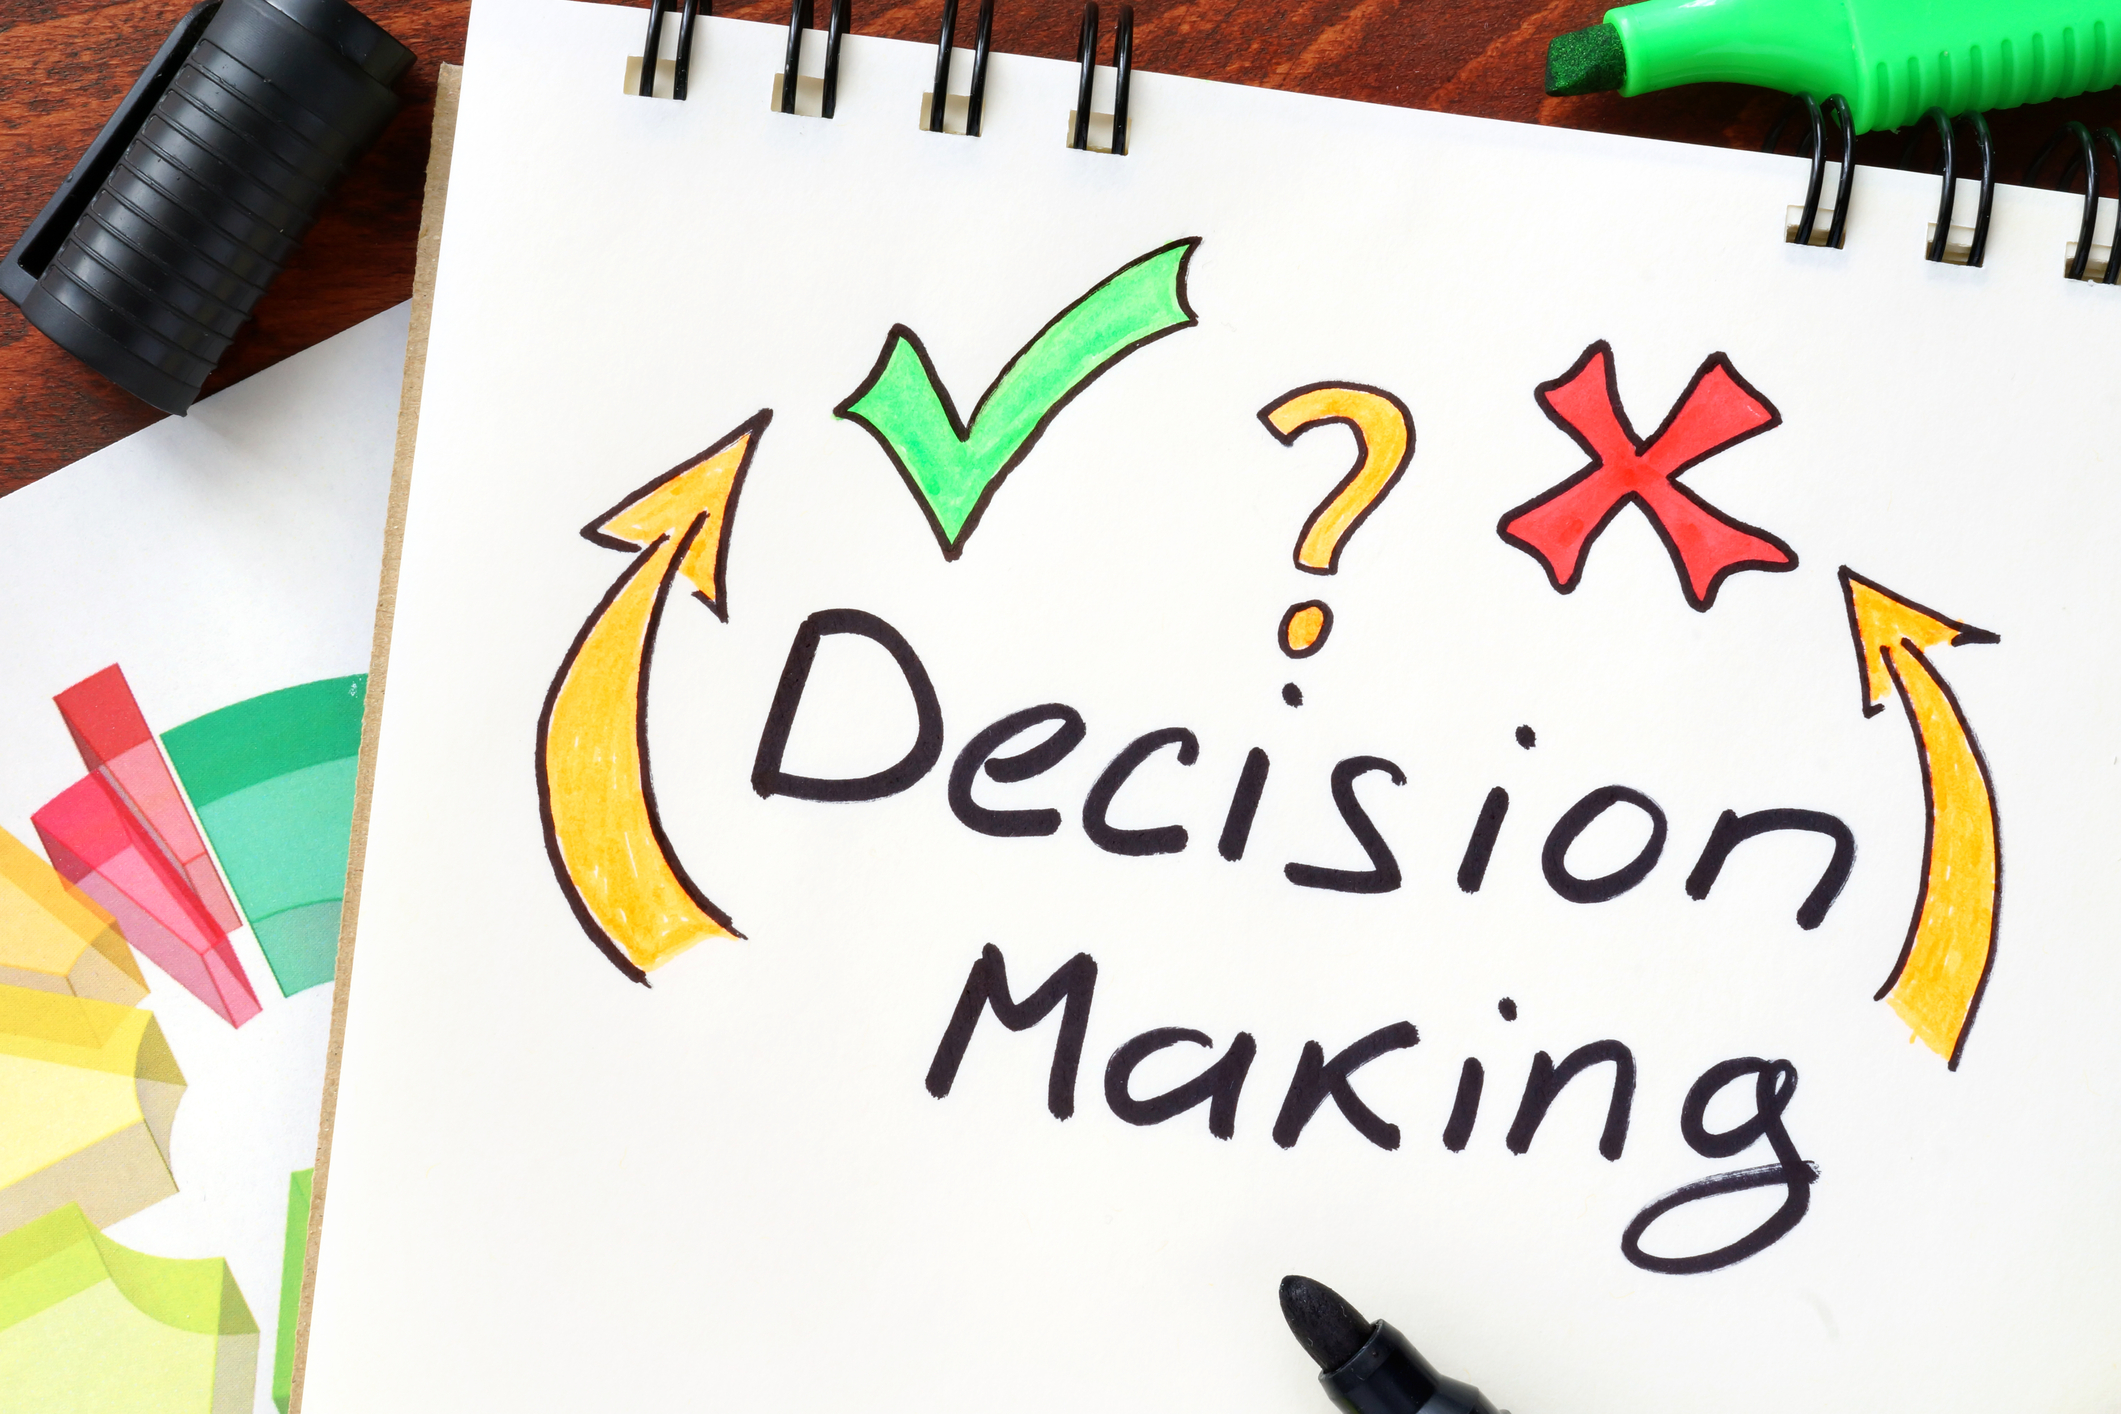 Learn how to make good decisions in your 20s